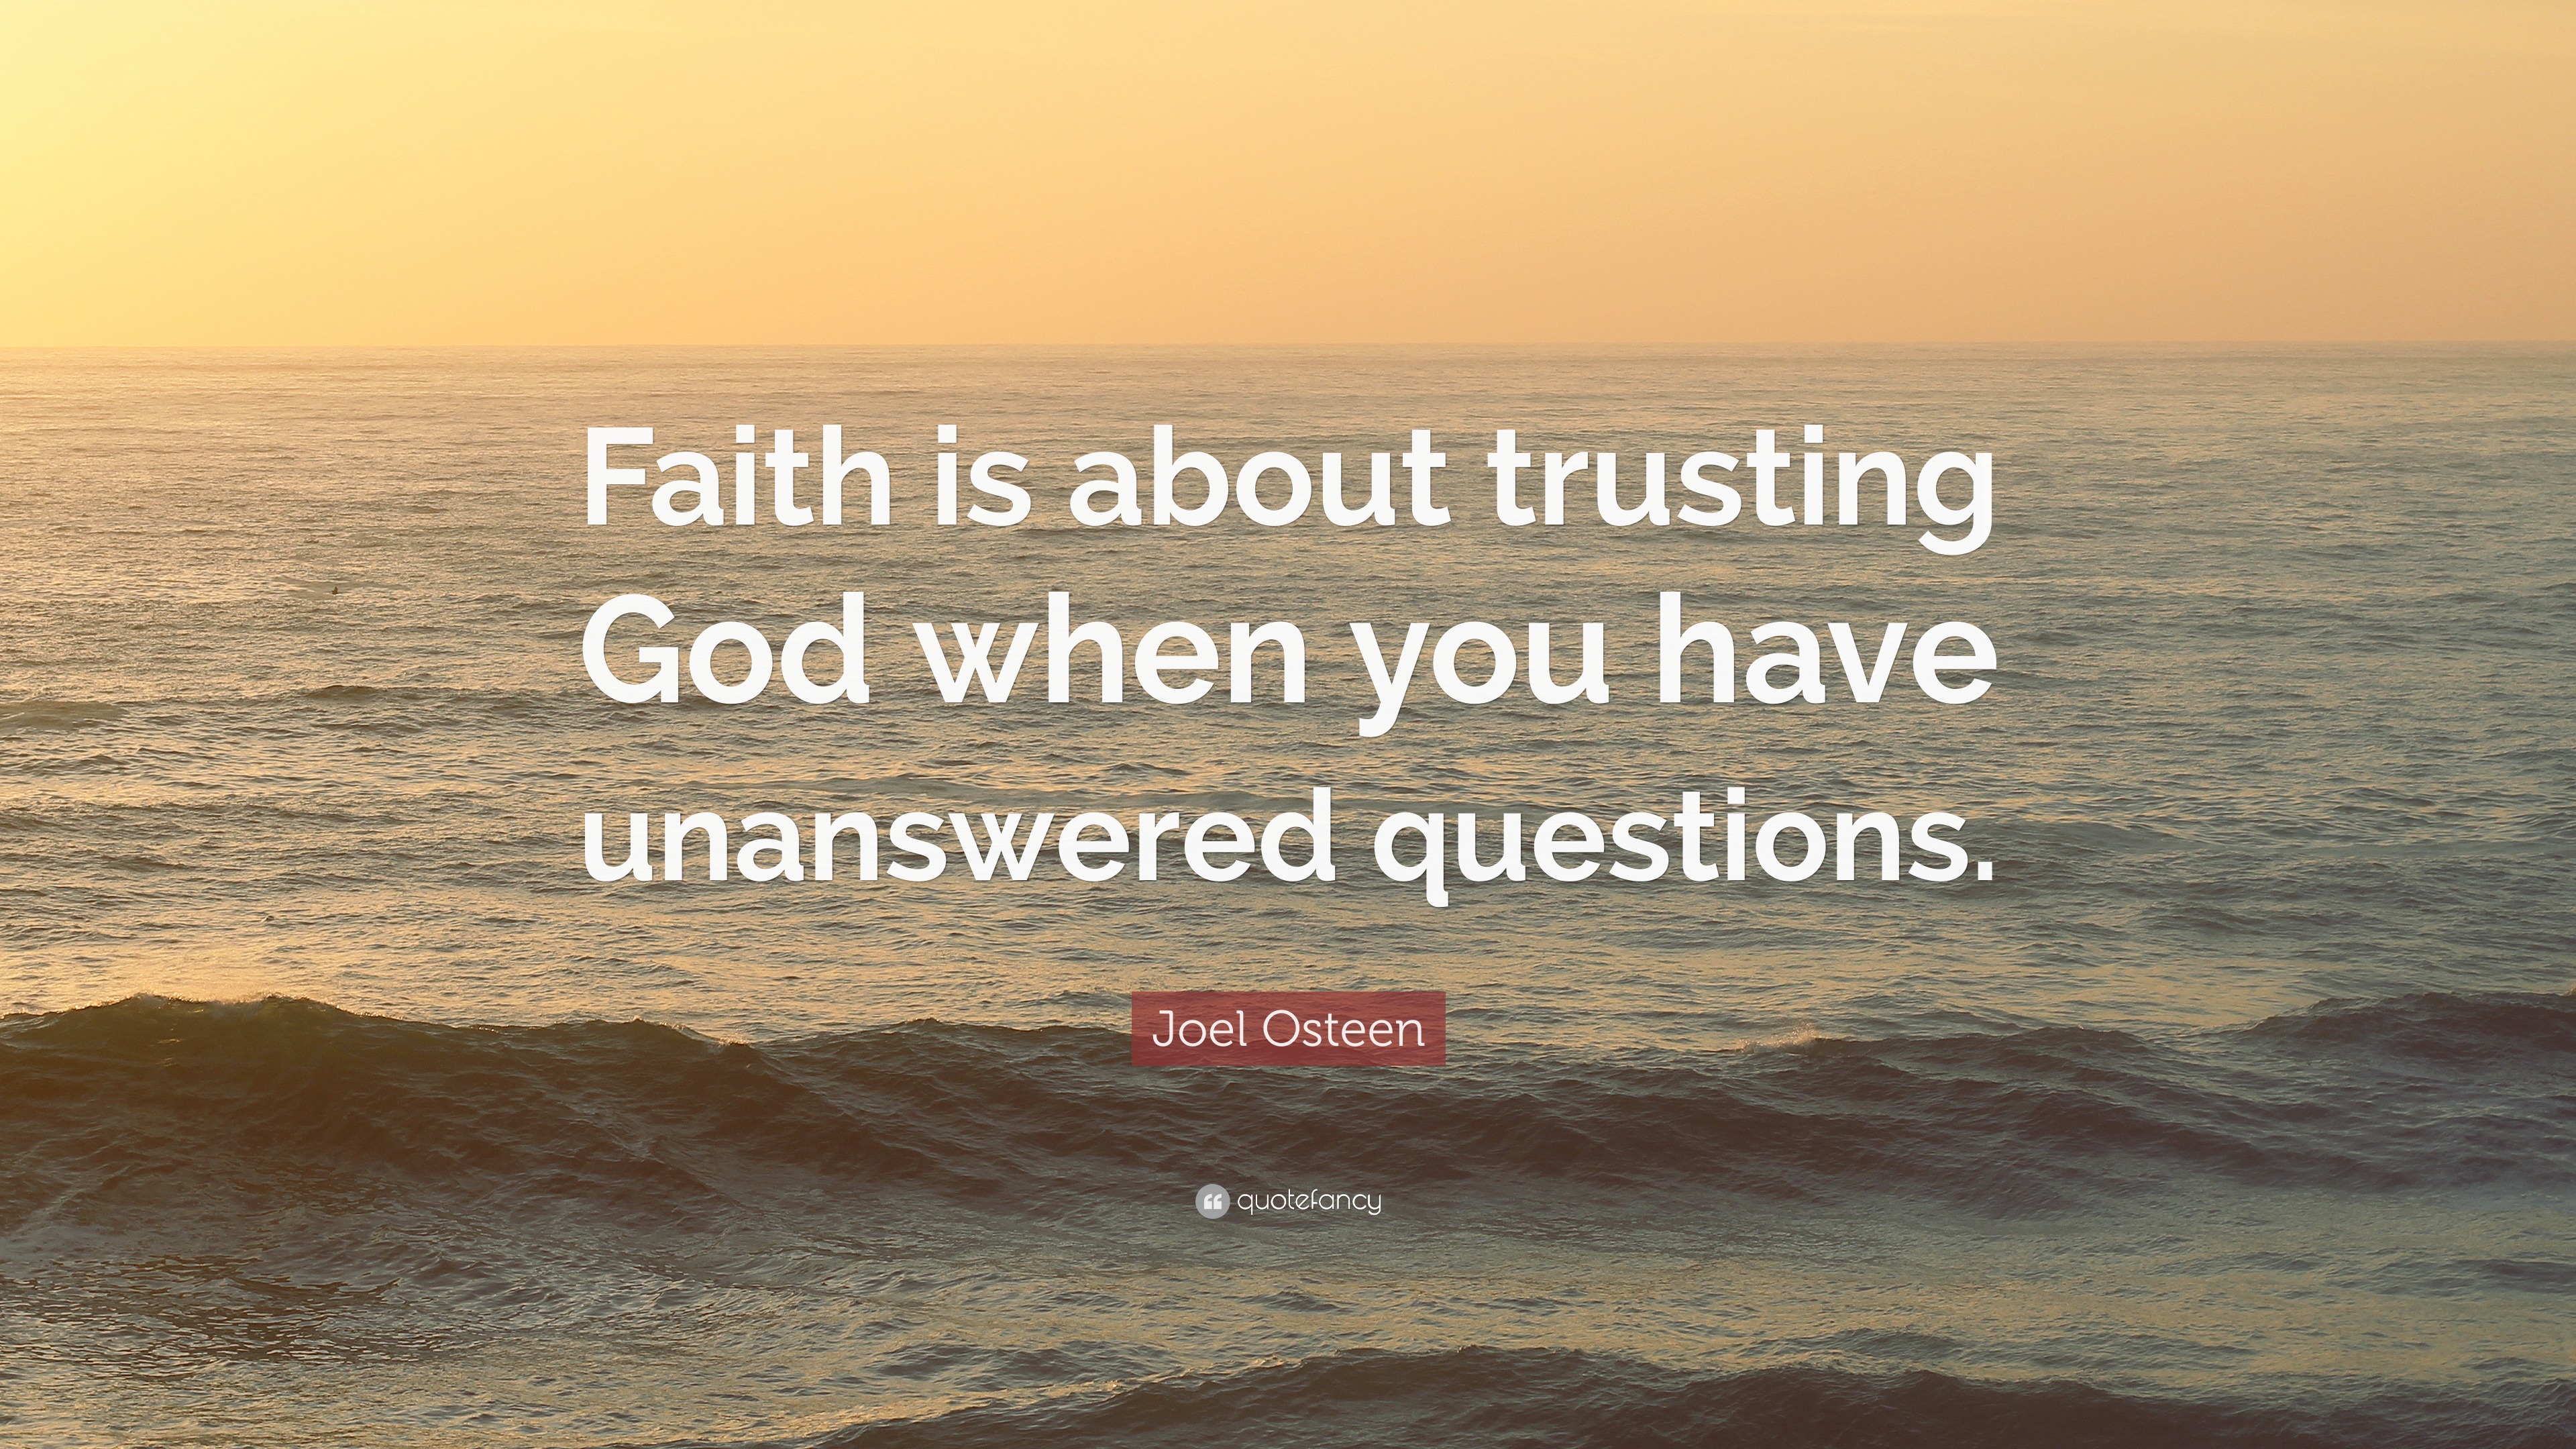 Joel Osteen Quote “Faith is about trusting God when you